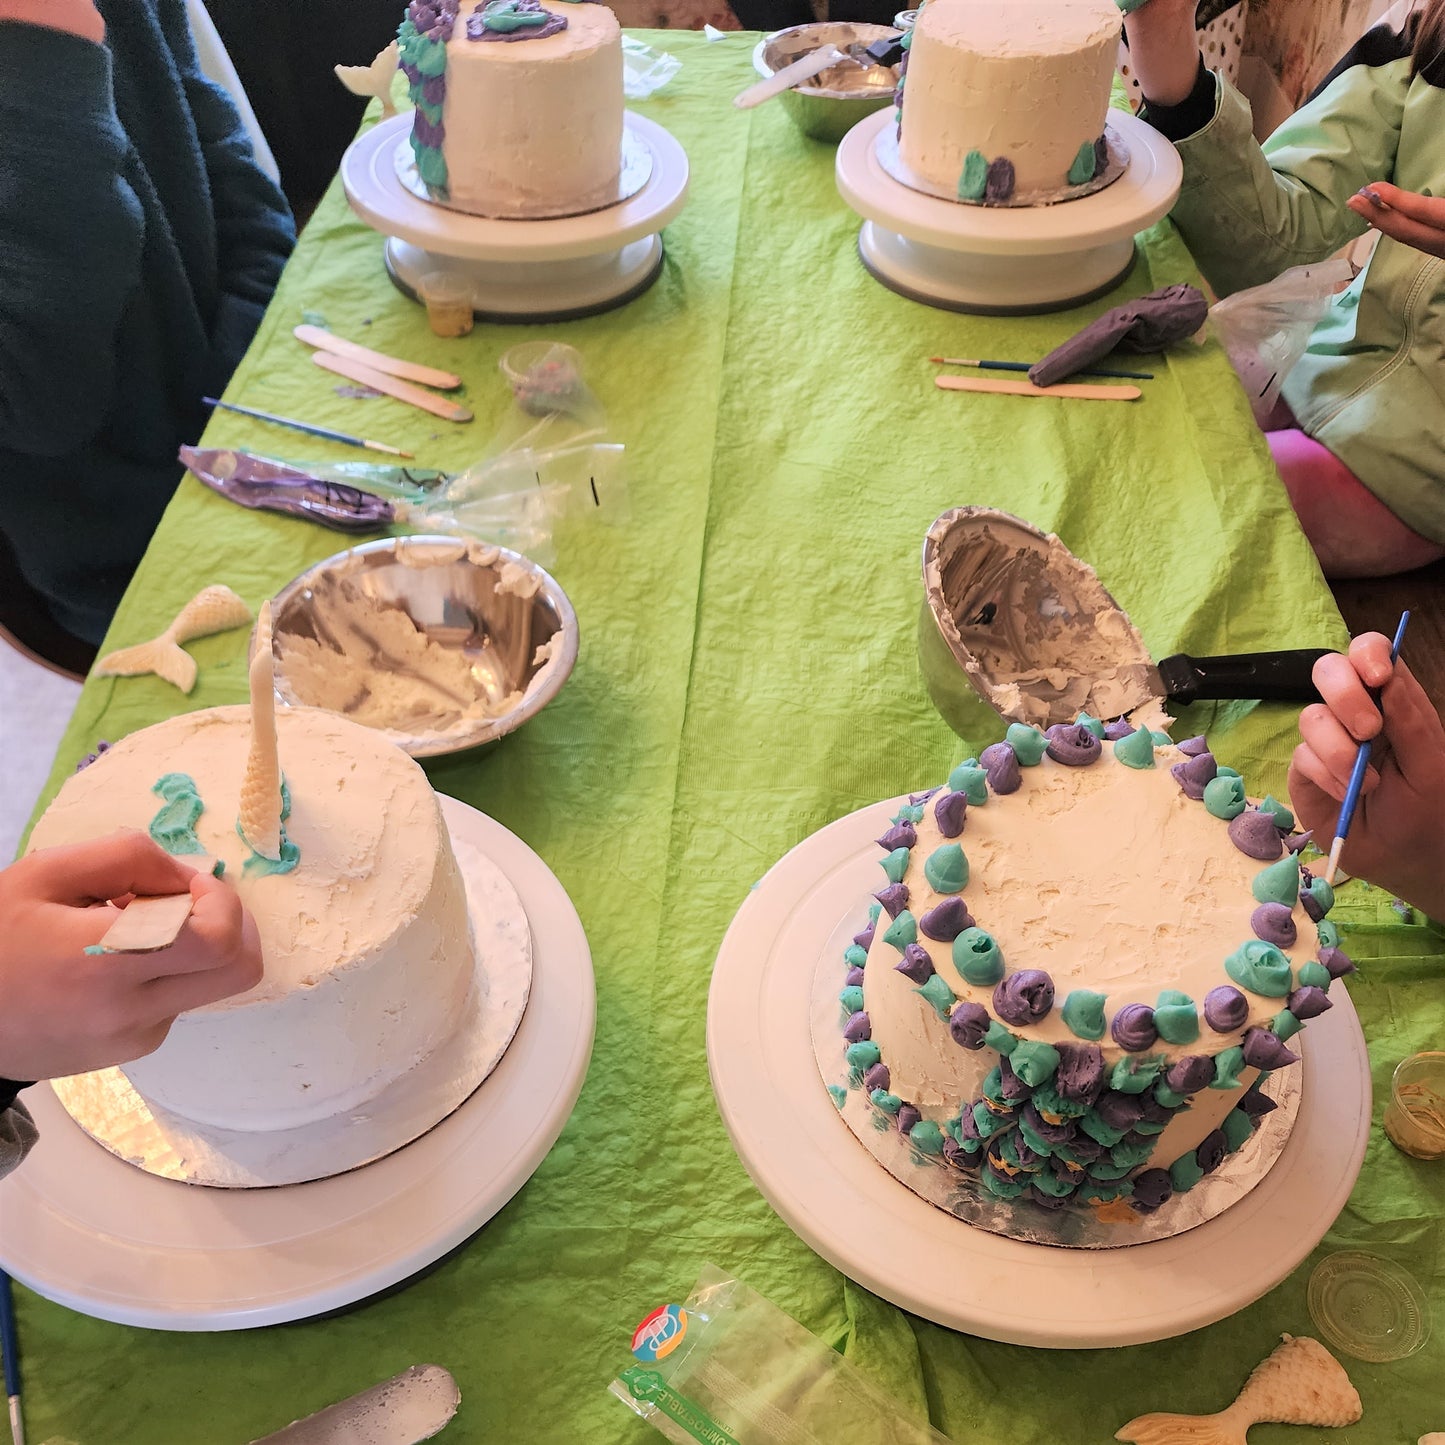 kids are decorating four cakes in the theme of a mermaid with teal and purple frosting scales and a white chocolate mermaid tail on tope of the cakes